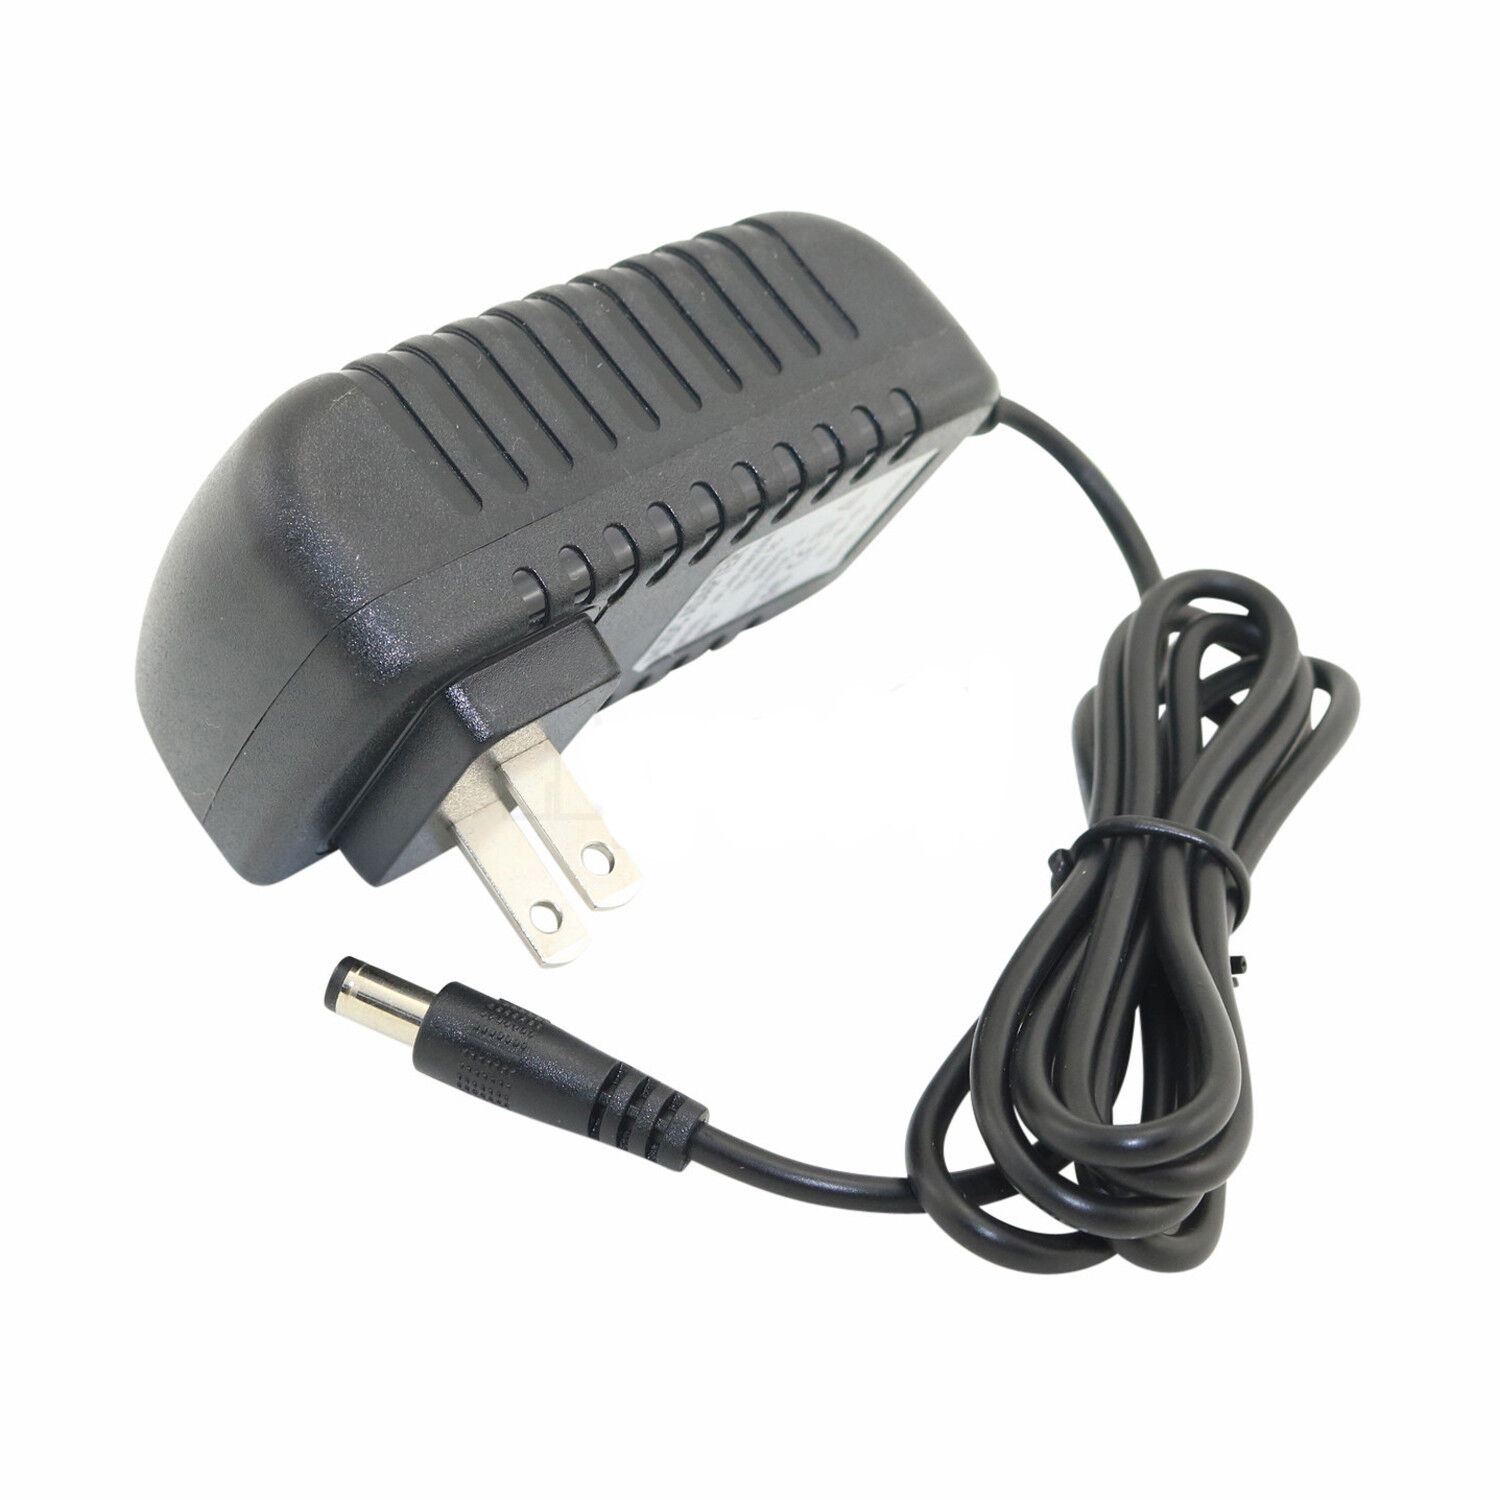 AC Adapter Compatible with Digitech PS0913B RP200A RP250 RP255 RP350 RP300A RP355 RPx400 RP1000 RP100 RP100A RP150 RP155